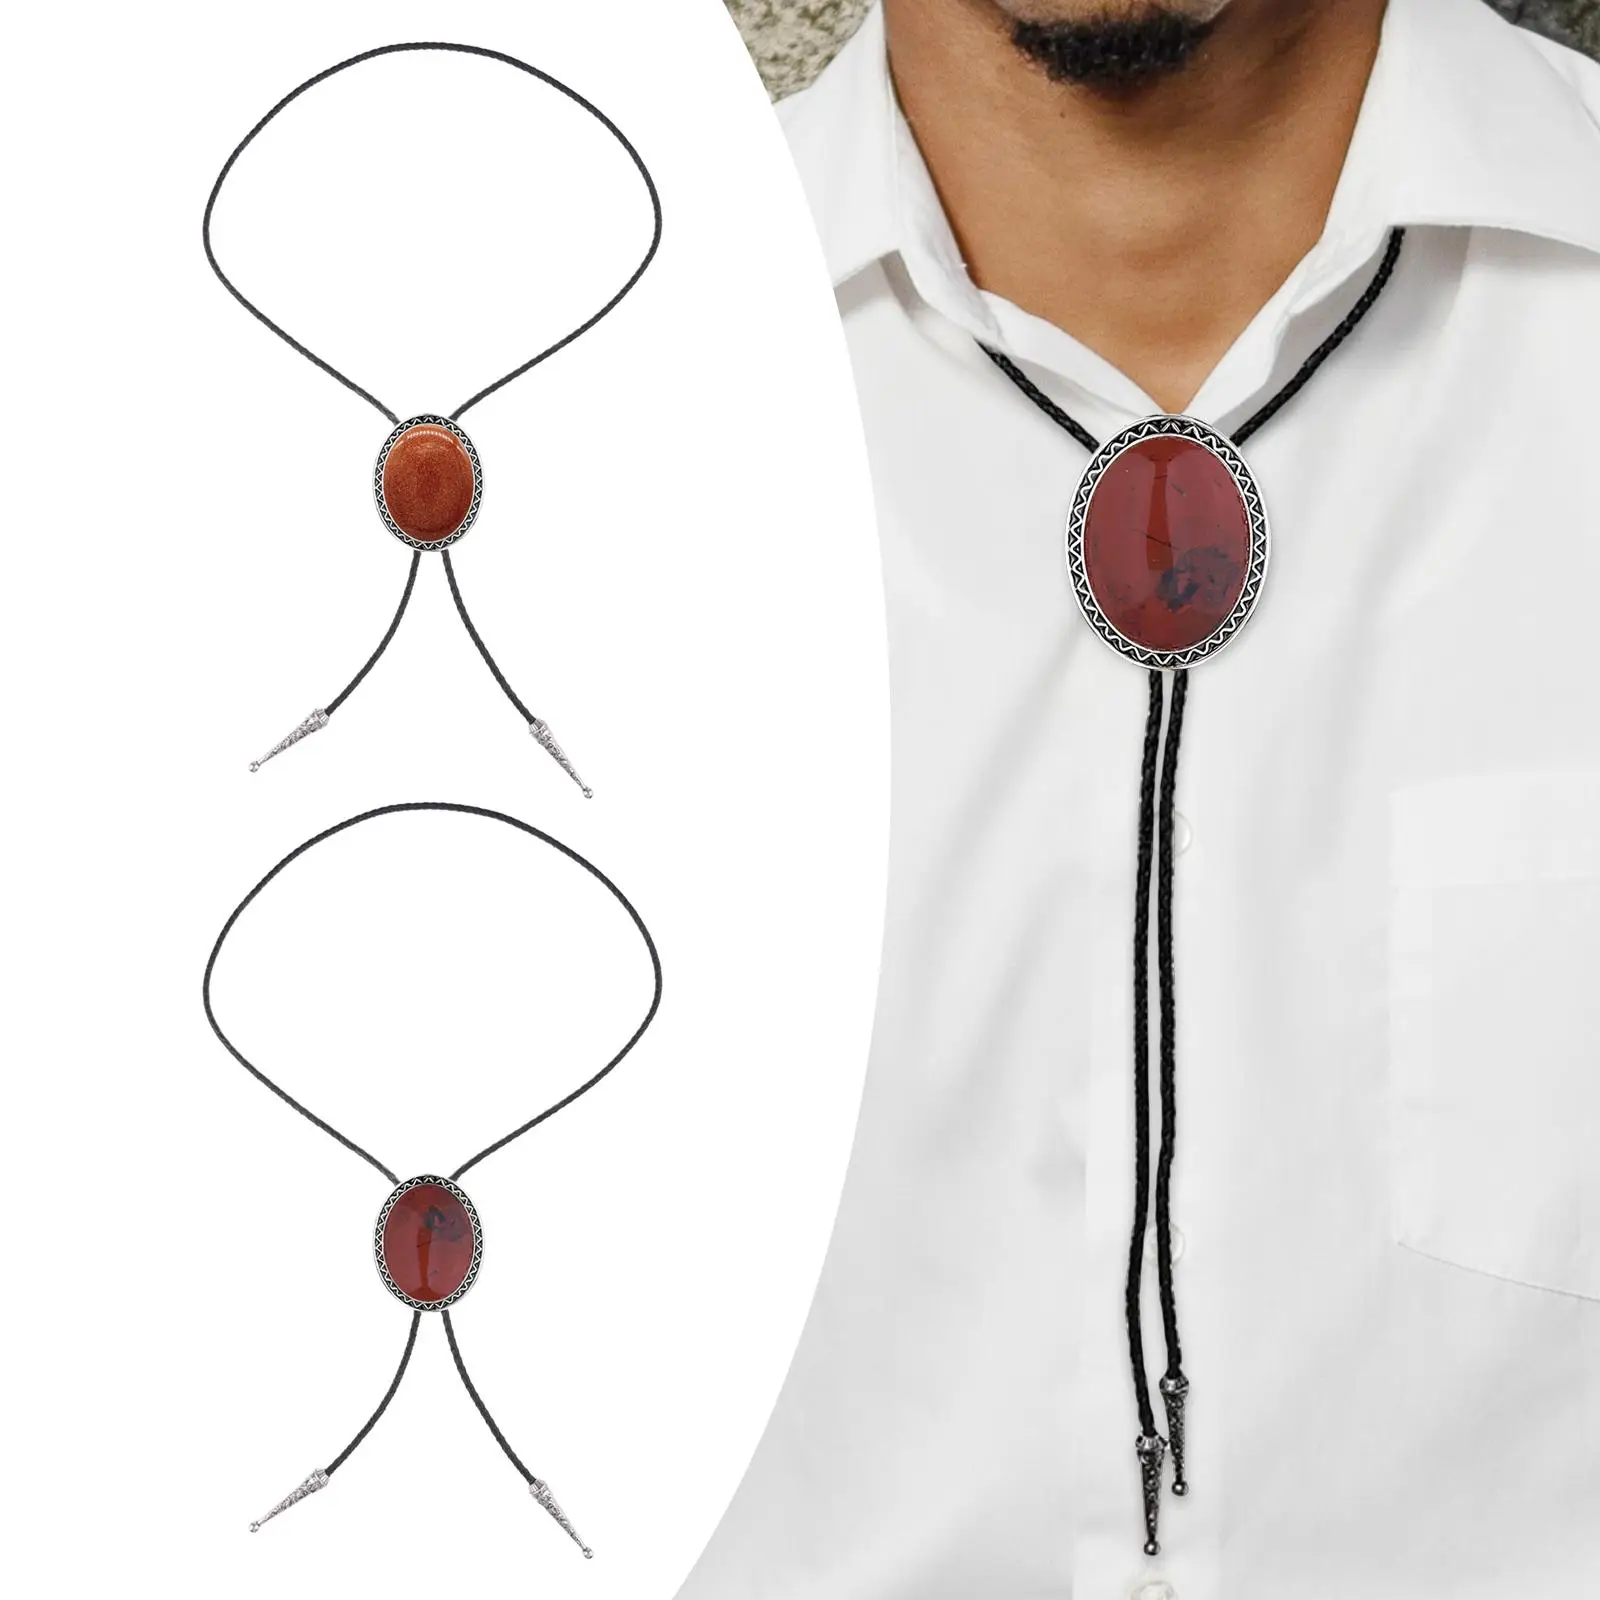 Cowboy Bolo Tie American Style Pendant Stylish Chain Vintage Style Fashion Necktie for Engagement Birthday Party Graduation Prom